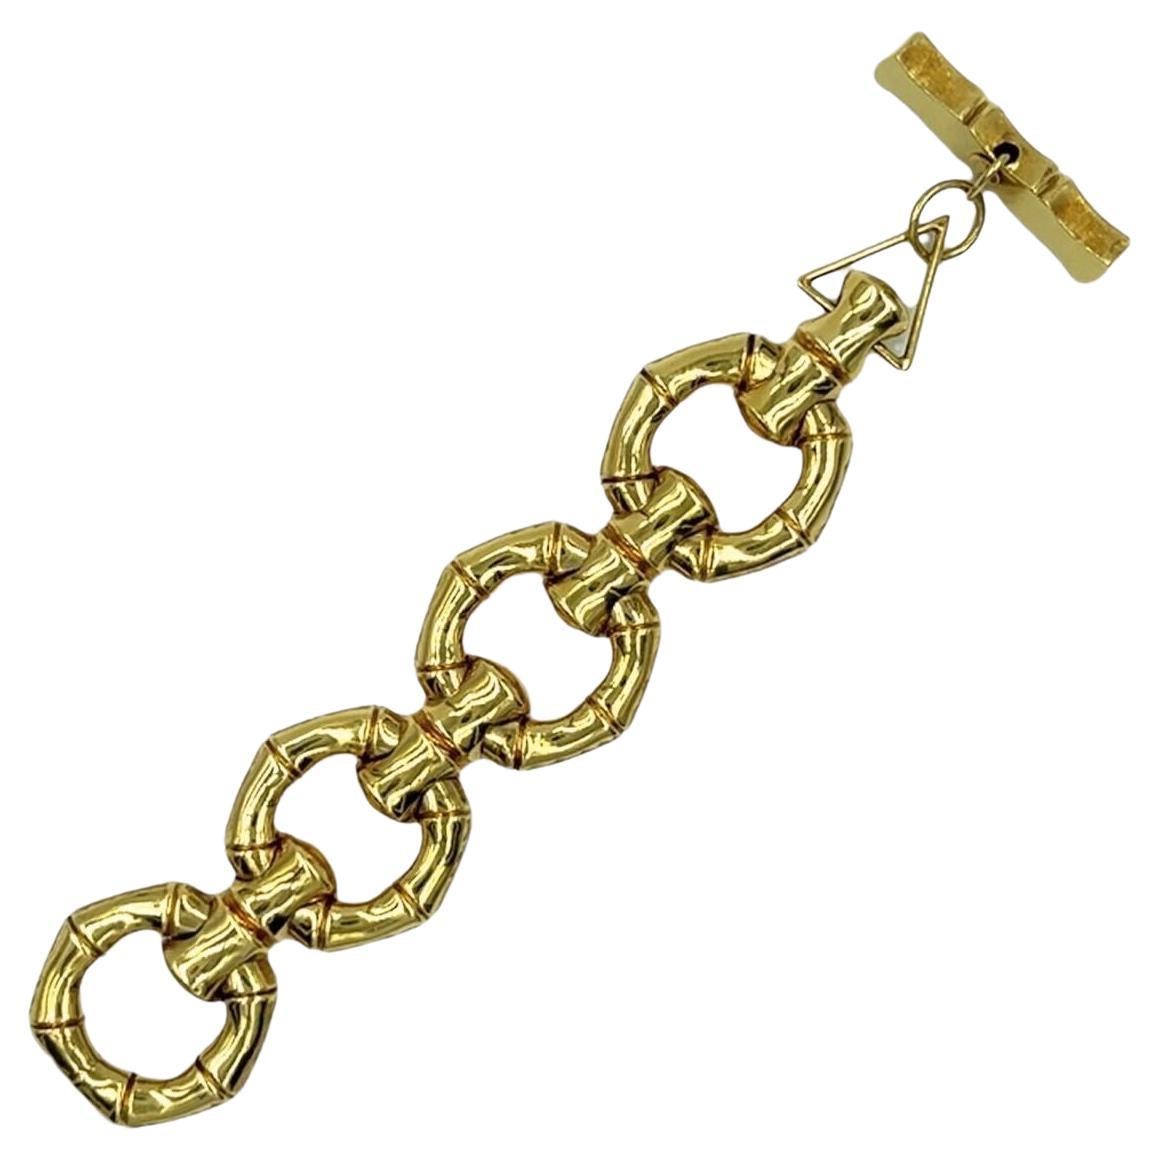 An 18 karat yellow gold bracelet, Italy.  Fashioned as a bold row of bamboo motif links completed by a toggle clasp.  Length approximately 7 inches.  Gross weight approximately 95.50 grams.